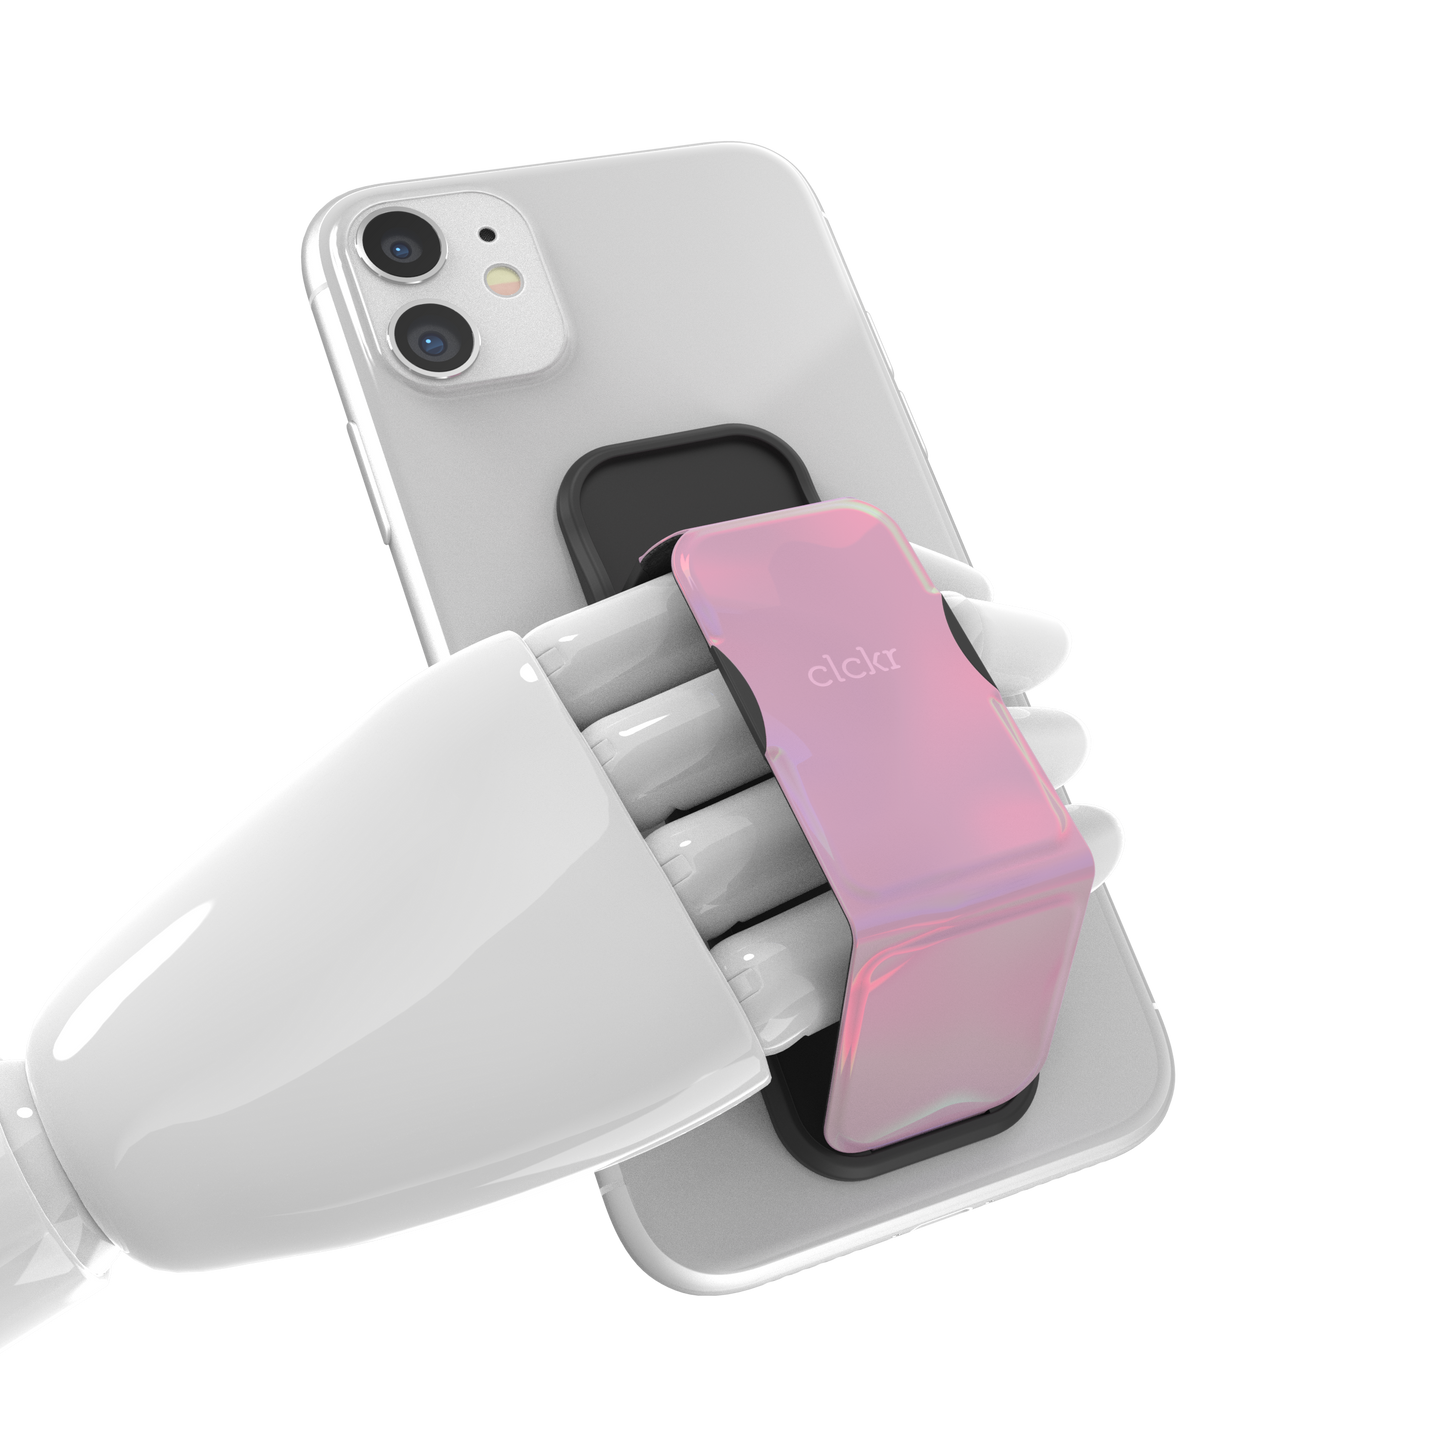 Holographic Universal Phone Stand & Grip - Pink